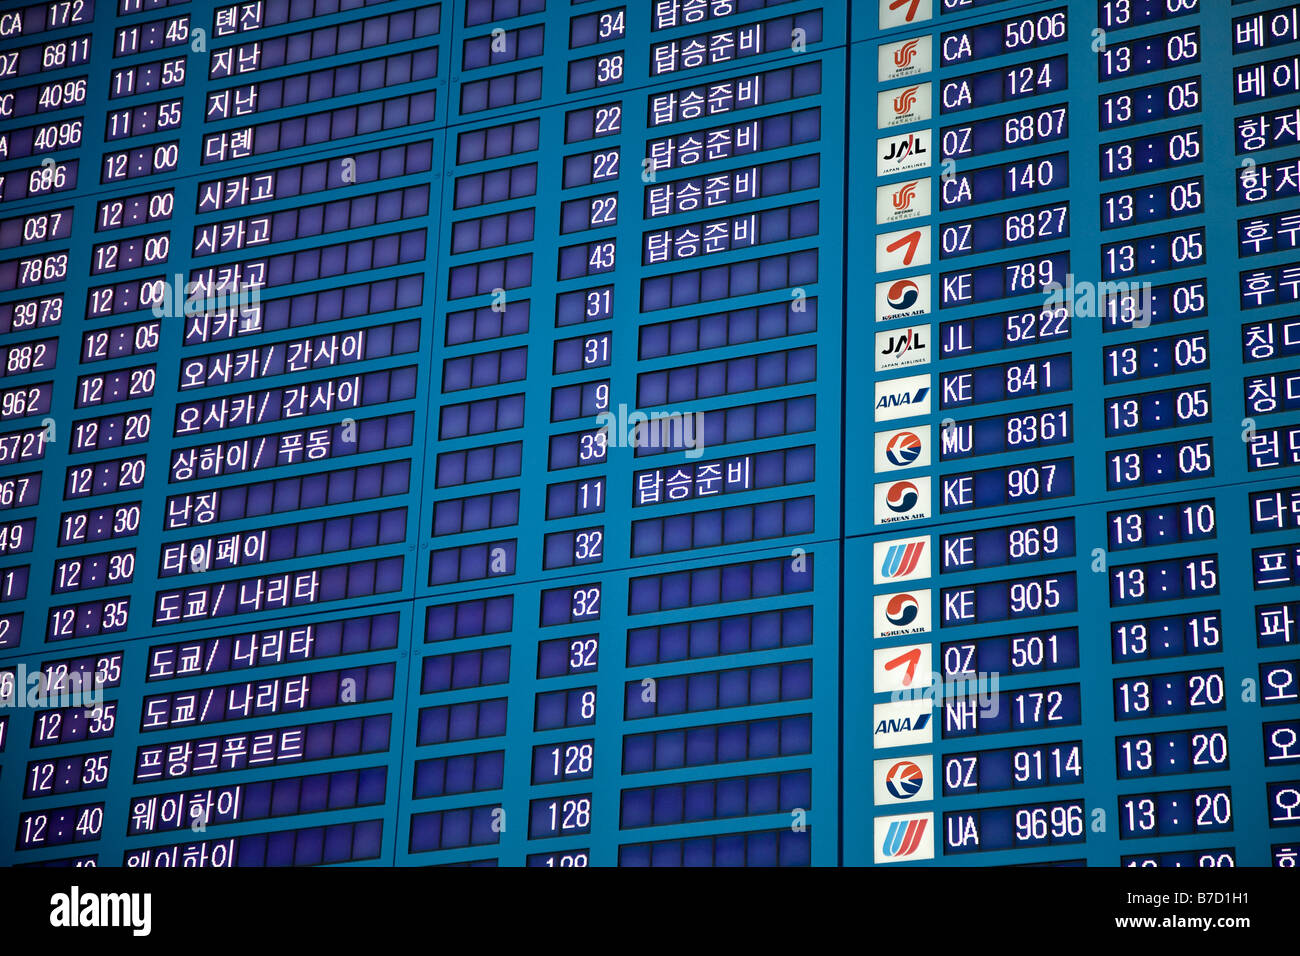 Arrivals and departure board in Seoul airport Stock Photo